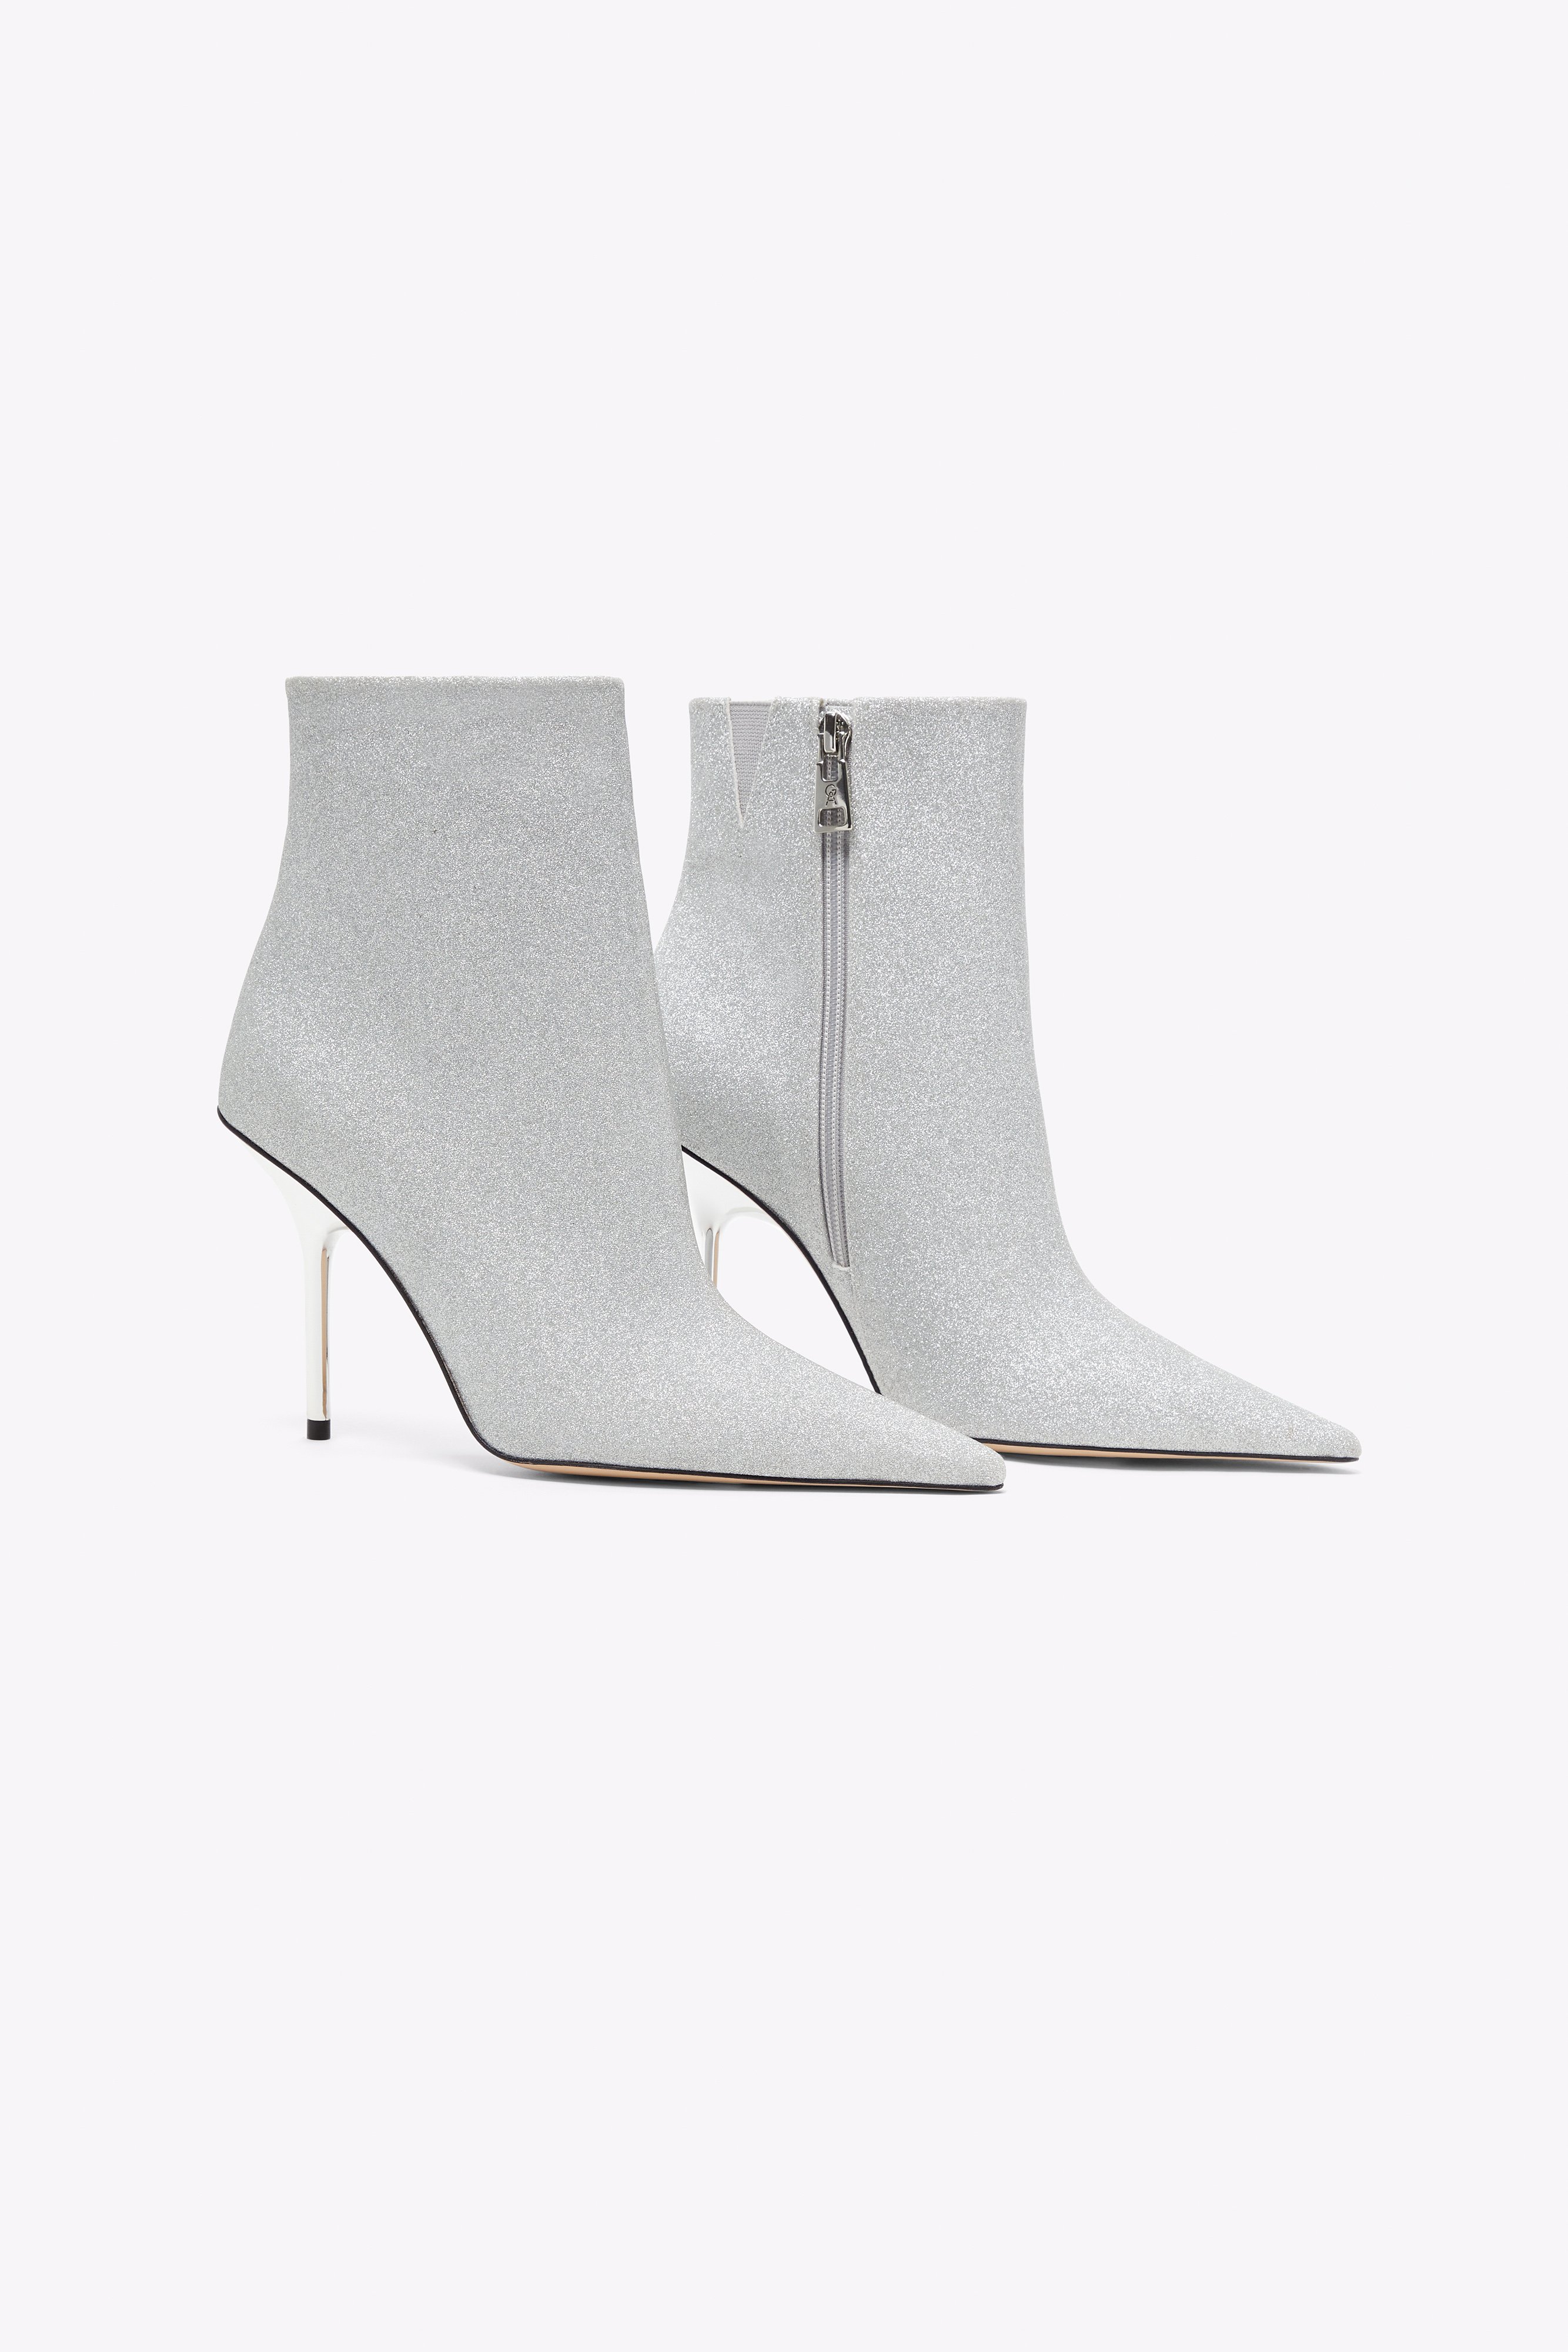 Styled with CLASSIC GLITTER HEEL BOOTIE | SILVER GLITTER